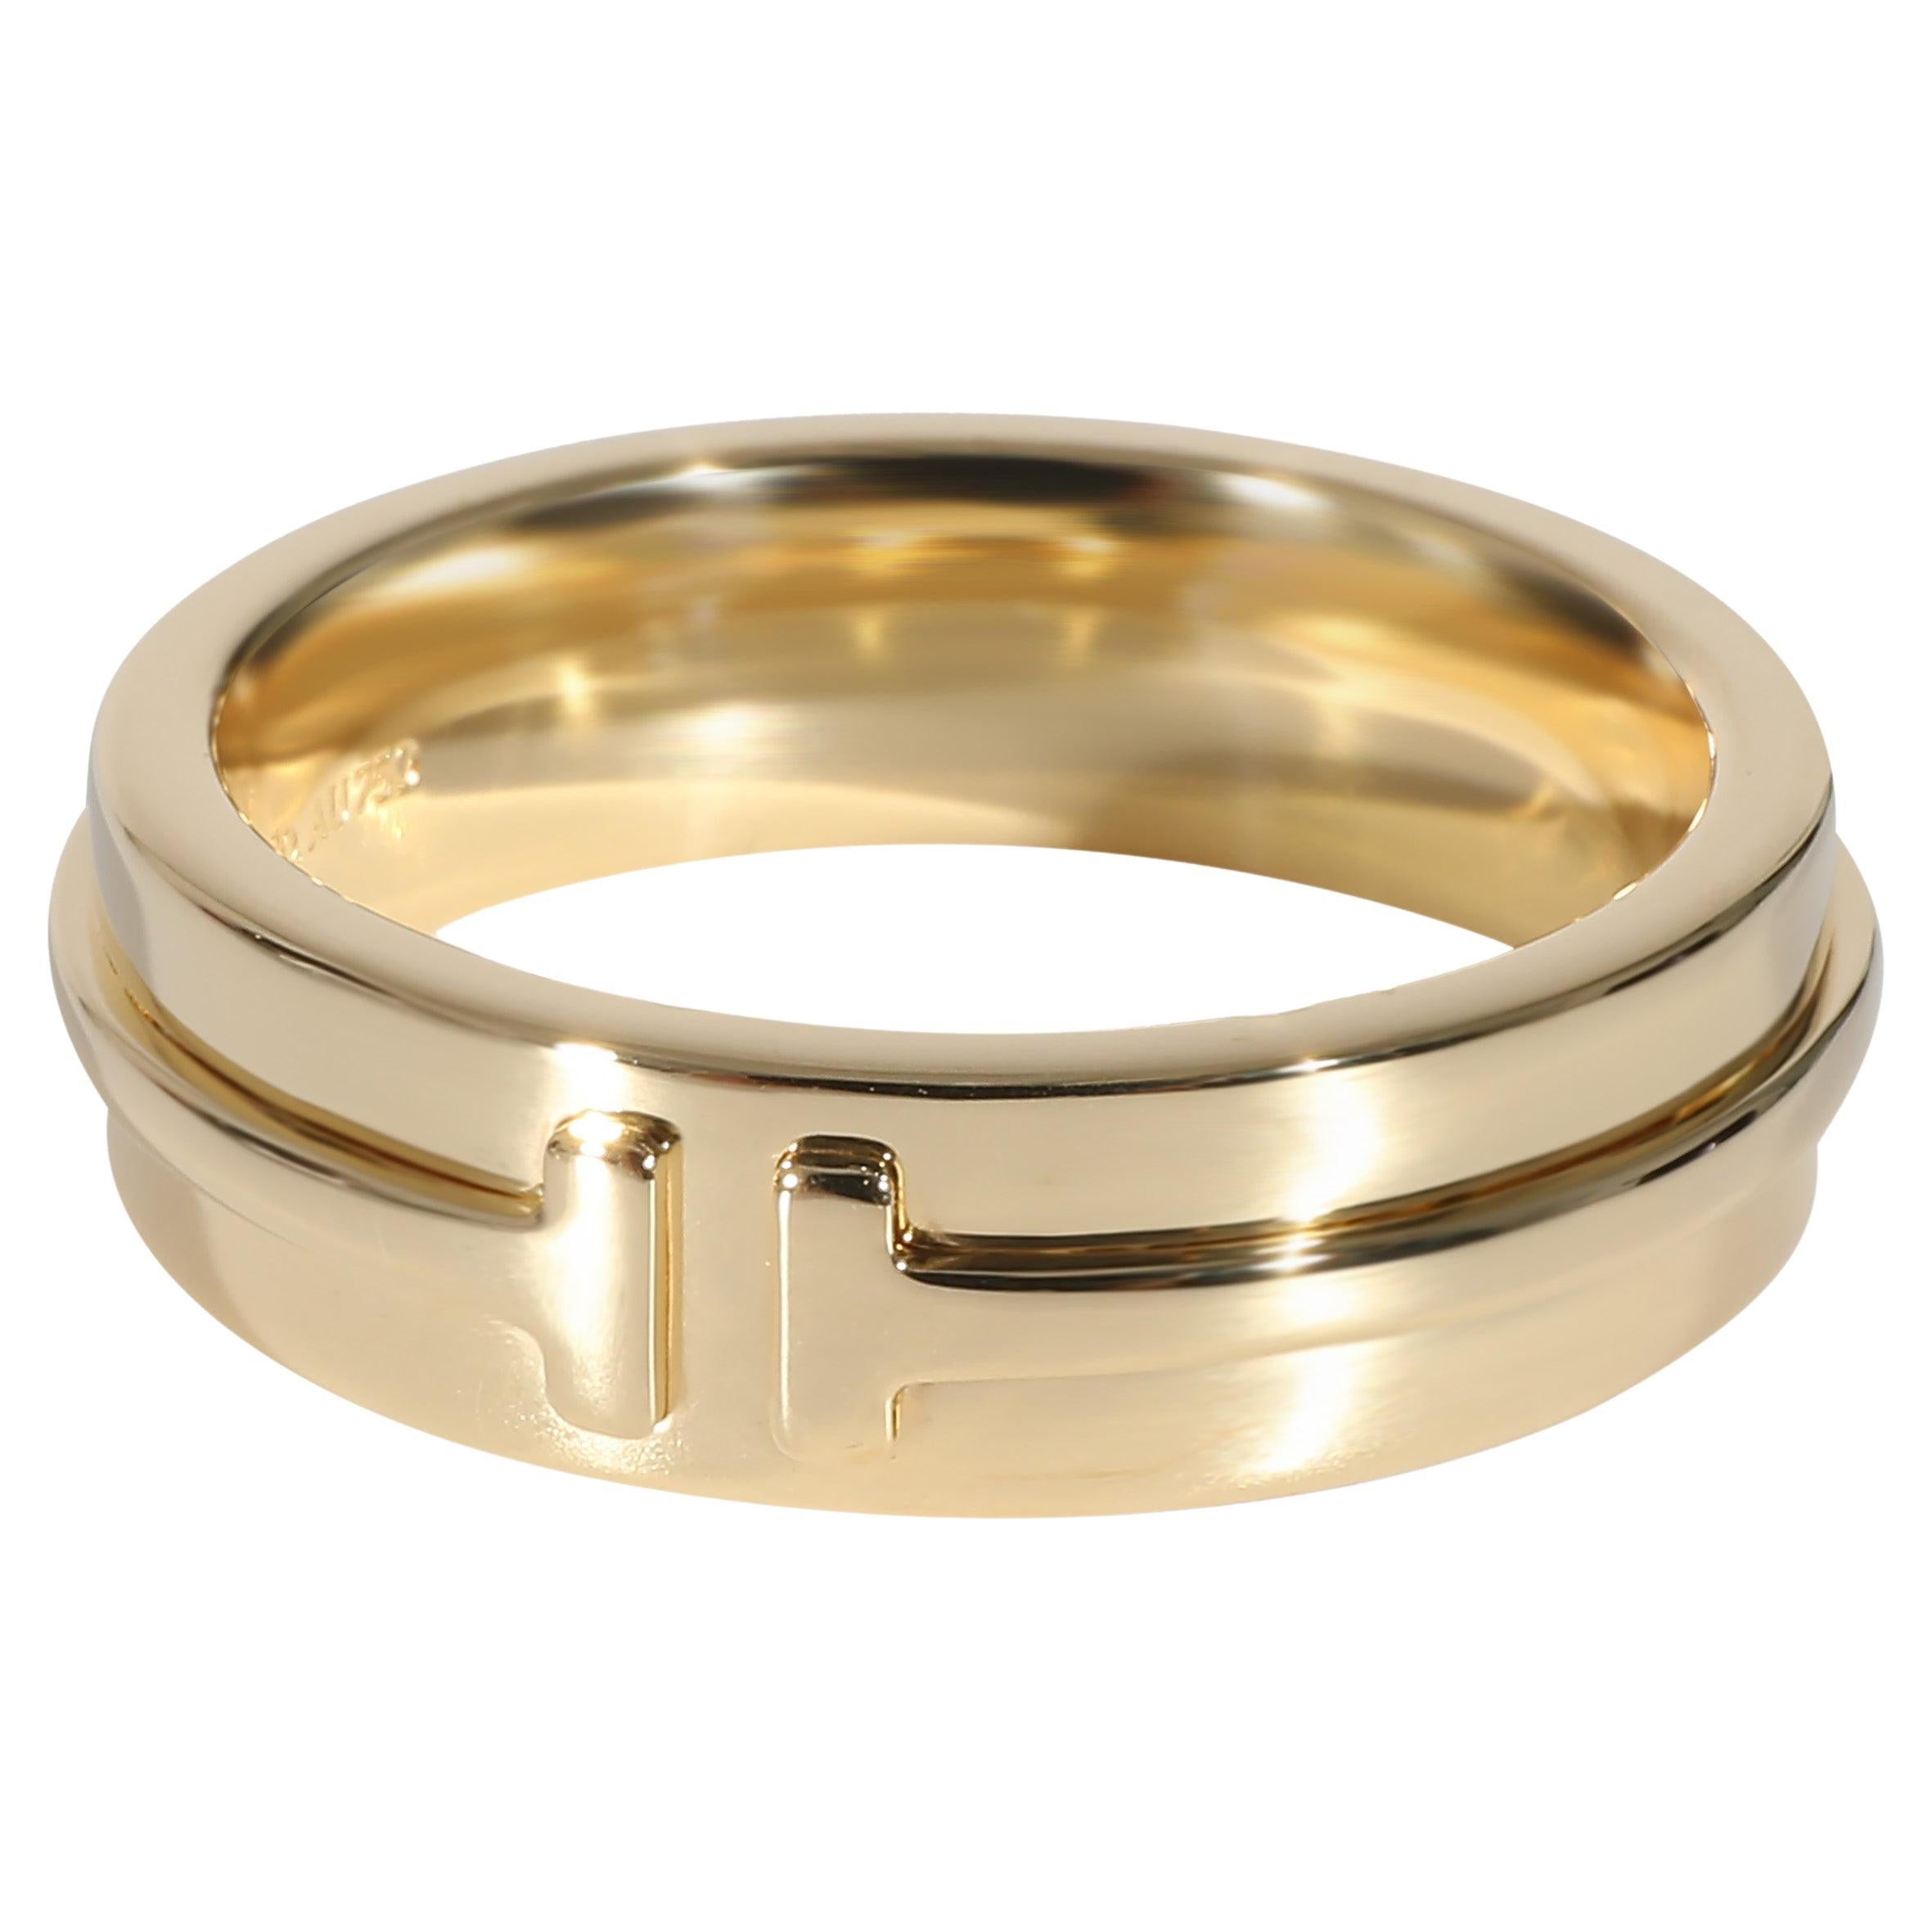 Tiffany & Co. Tiffany T Ring in 18K Yellow Gold For Sale